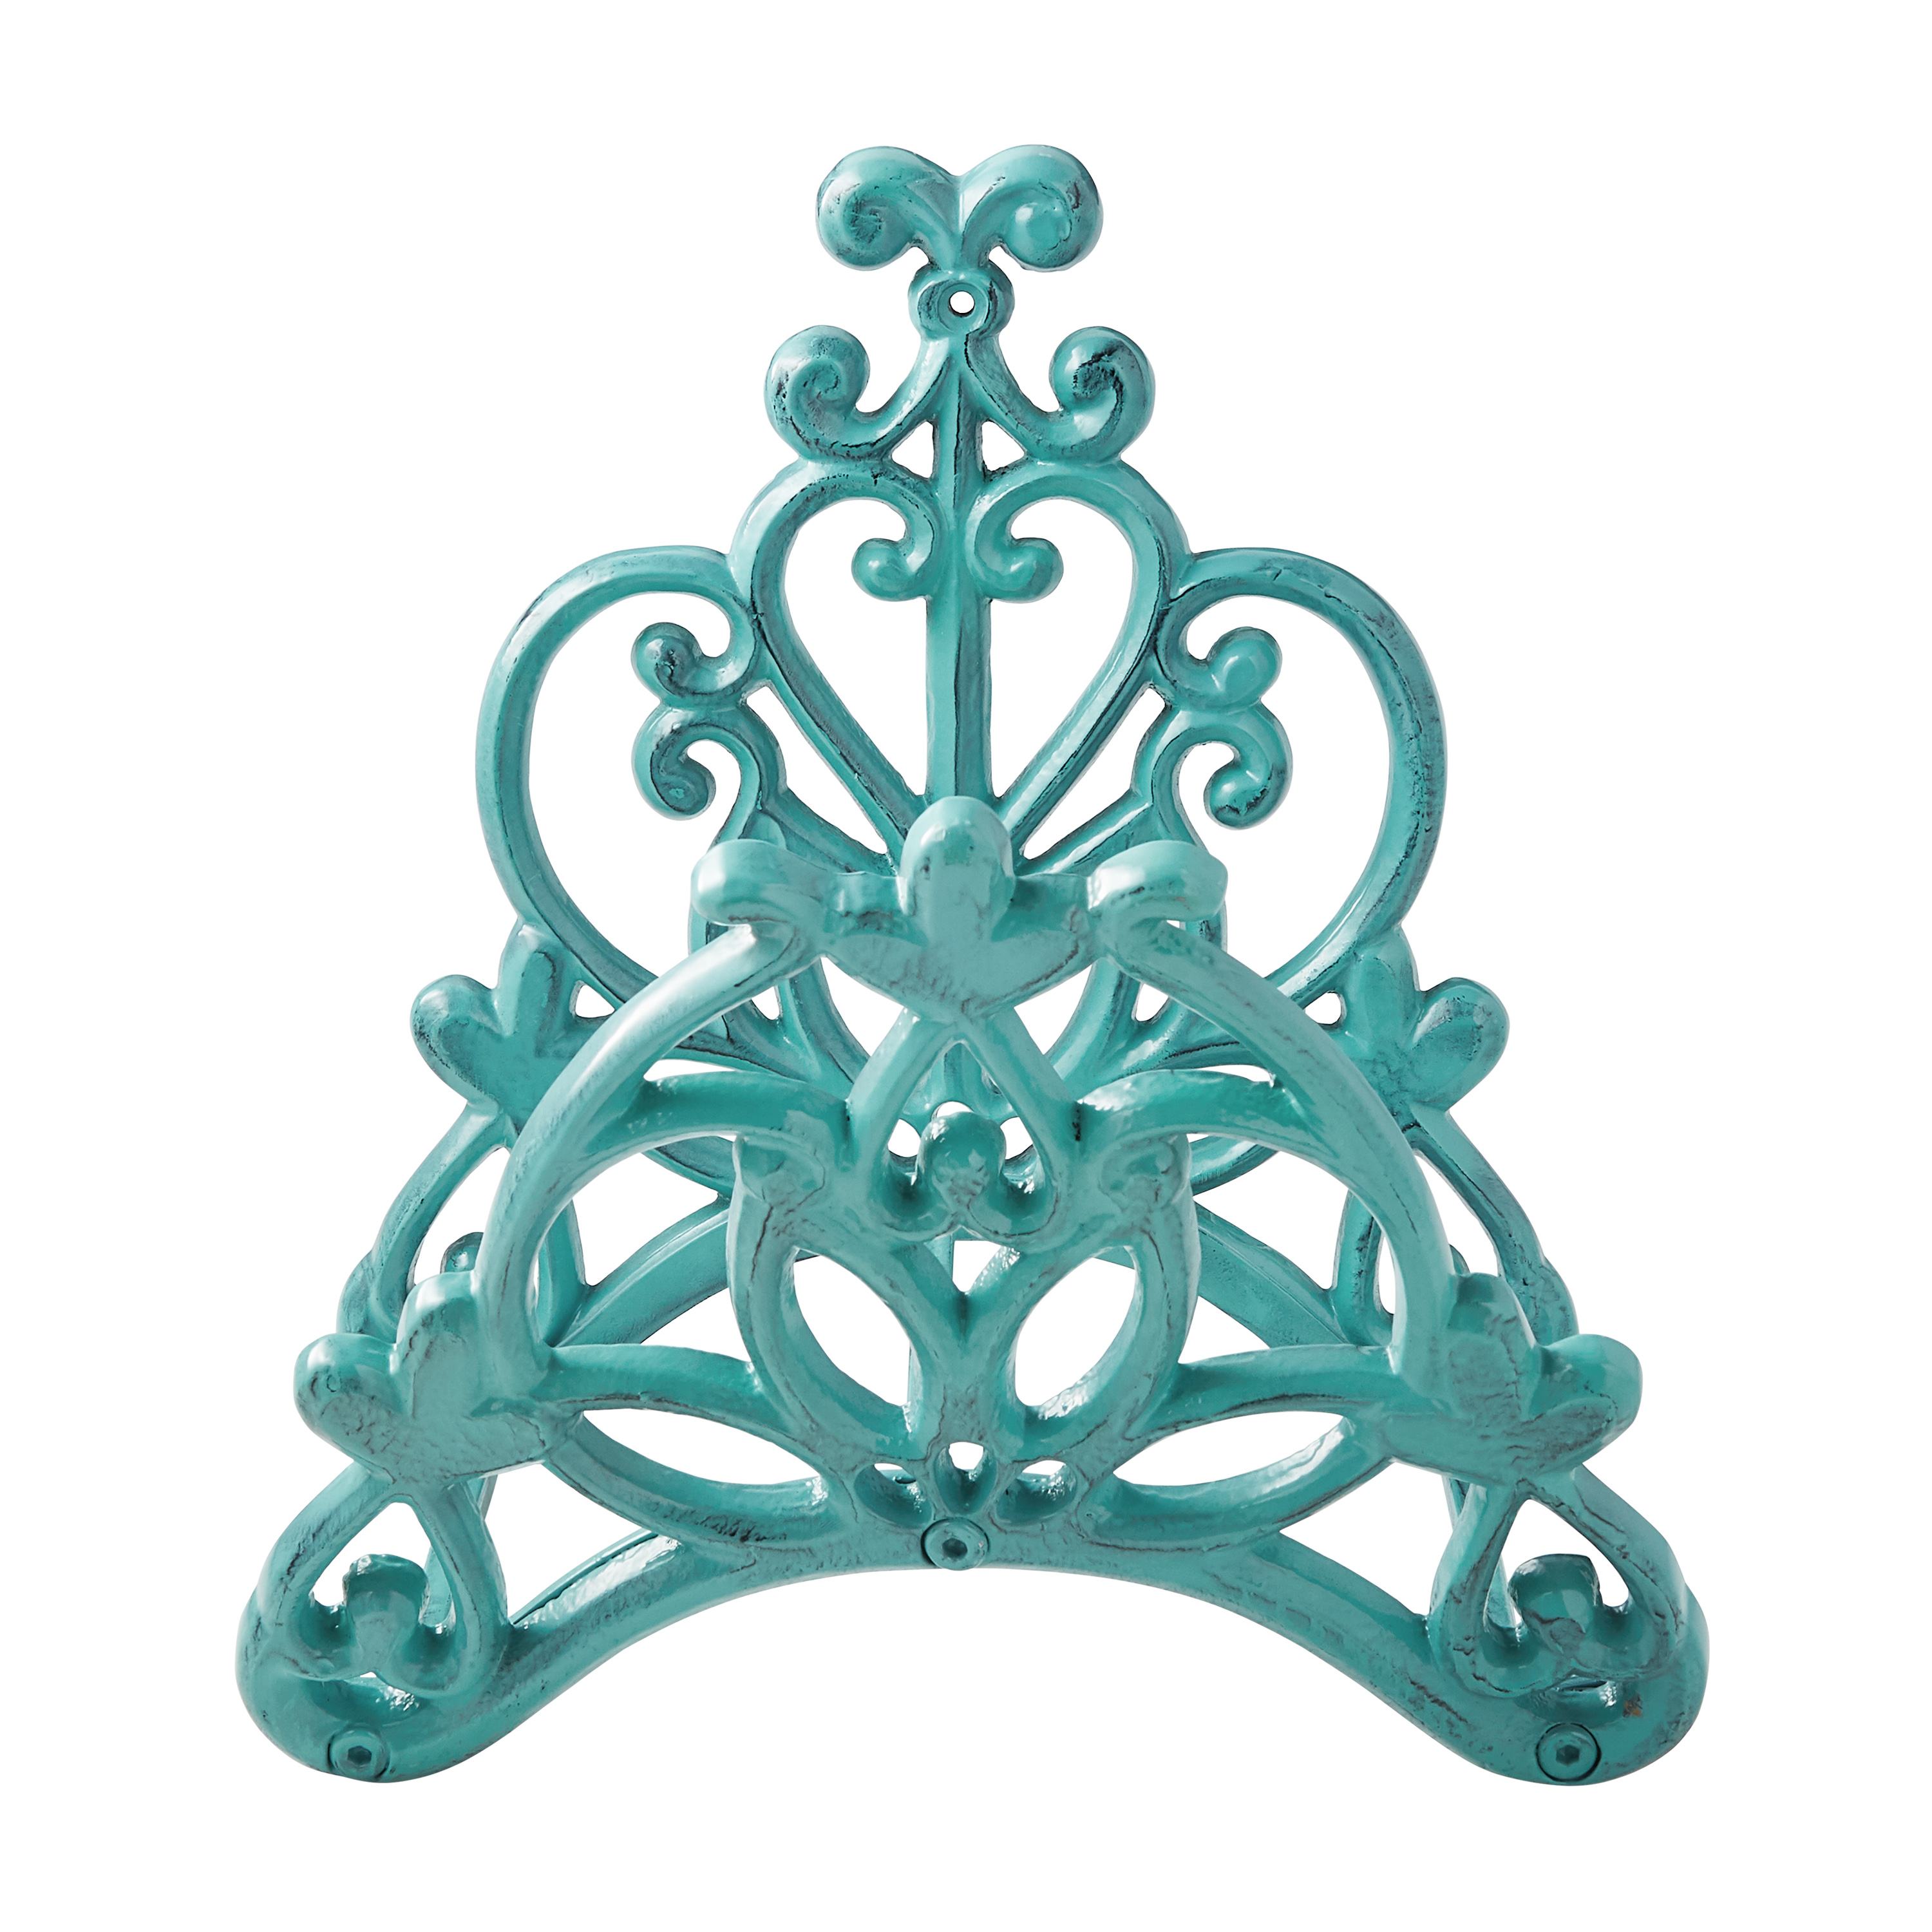 The Pioneer Woman Goldie Decorative Hose Hanger, Teal - image 1 of 7